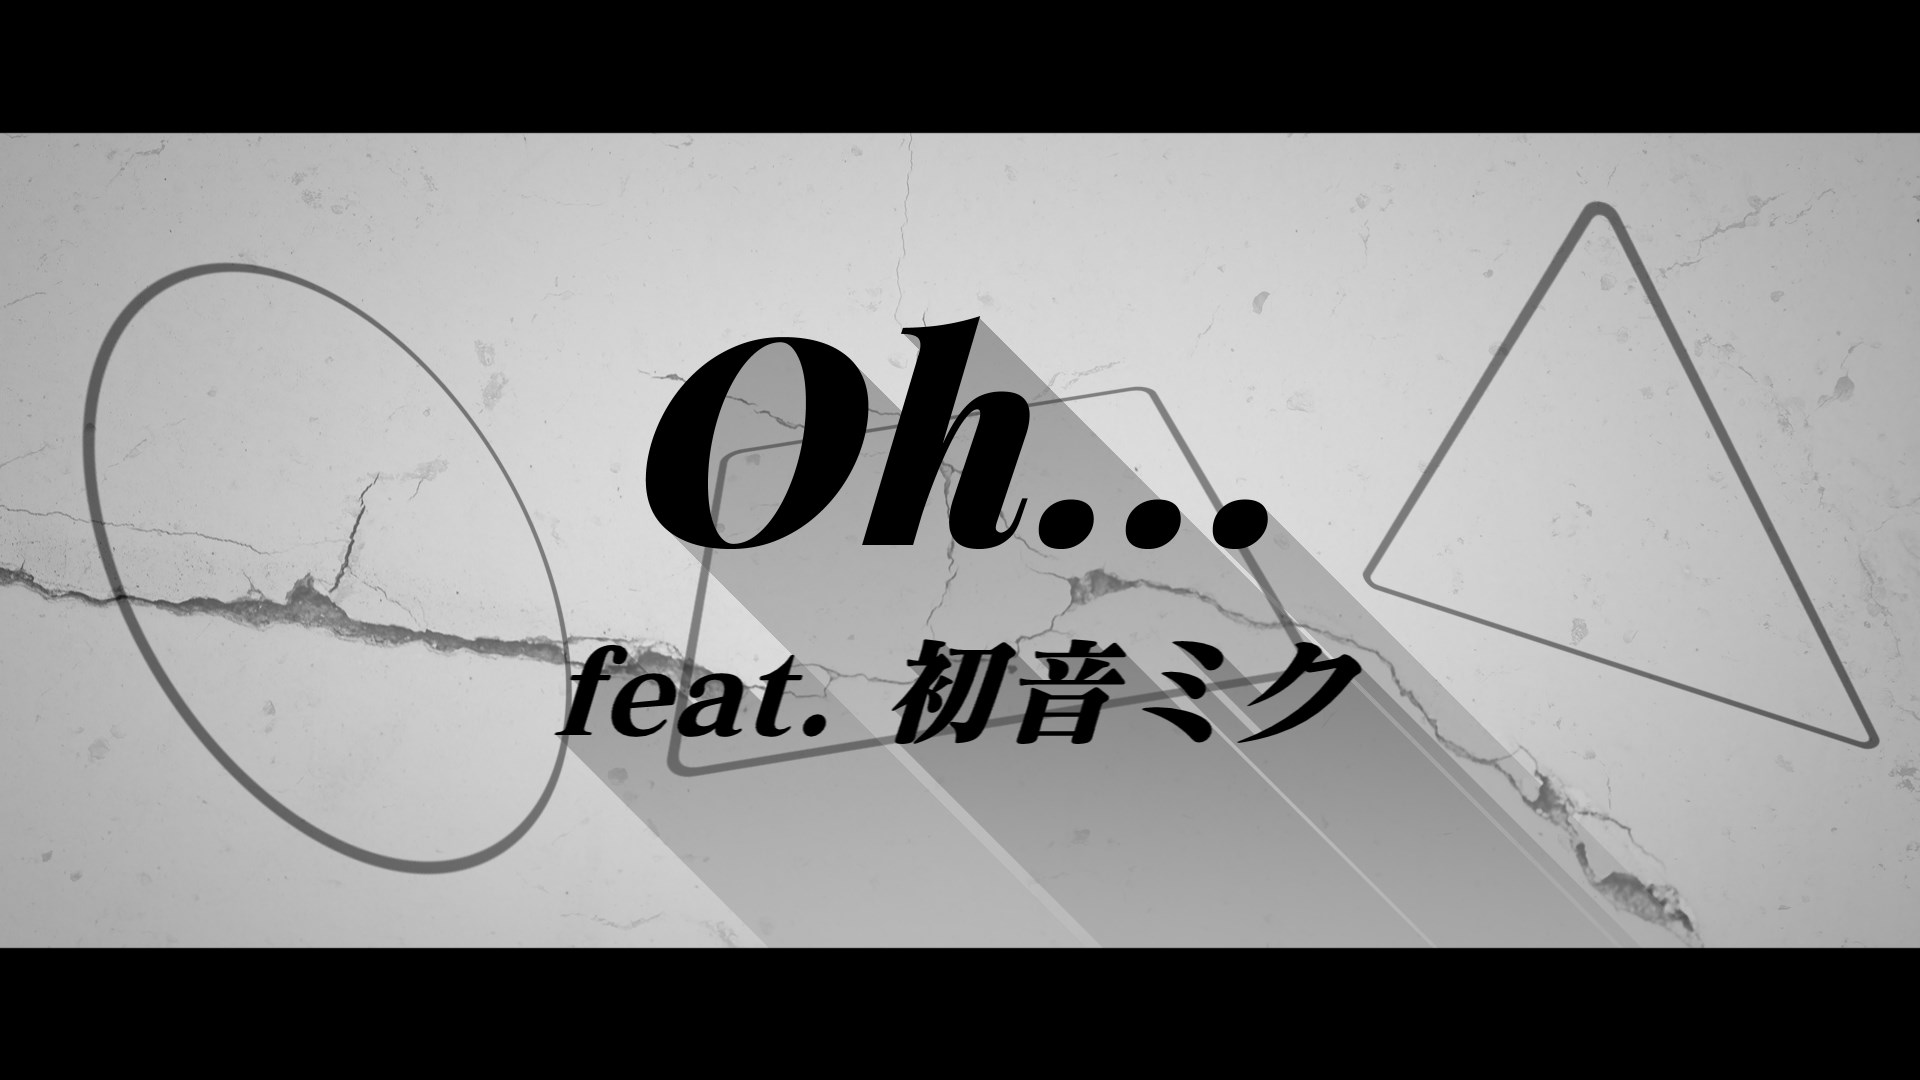 oh... / feat.初音ミク